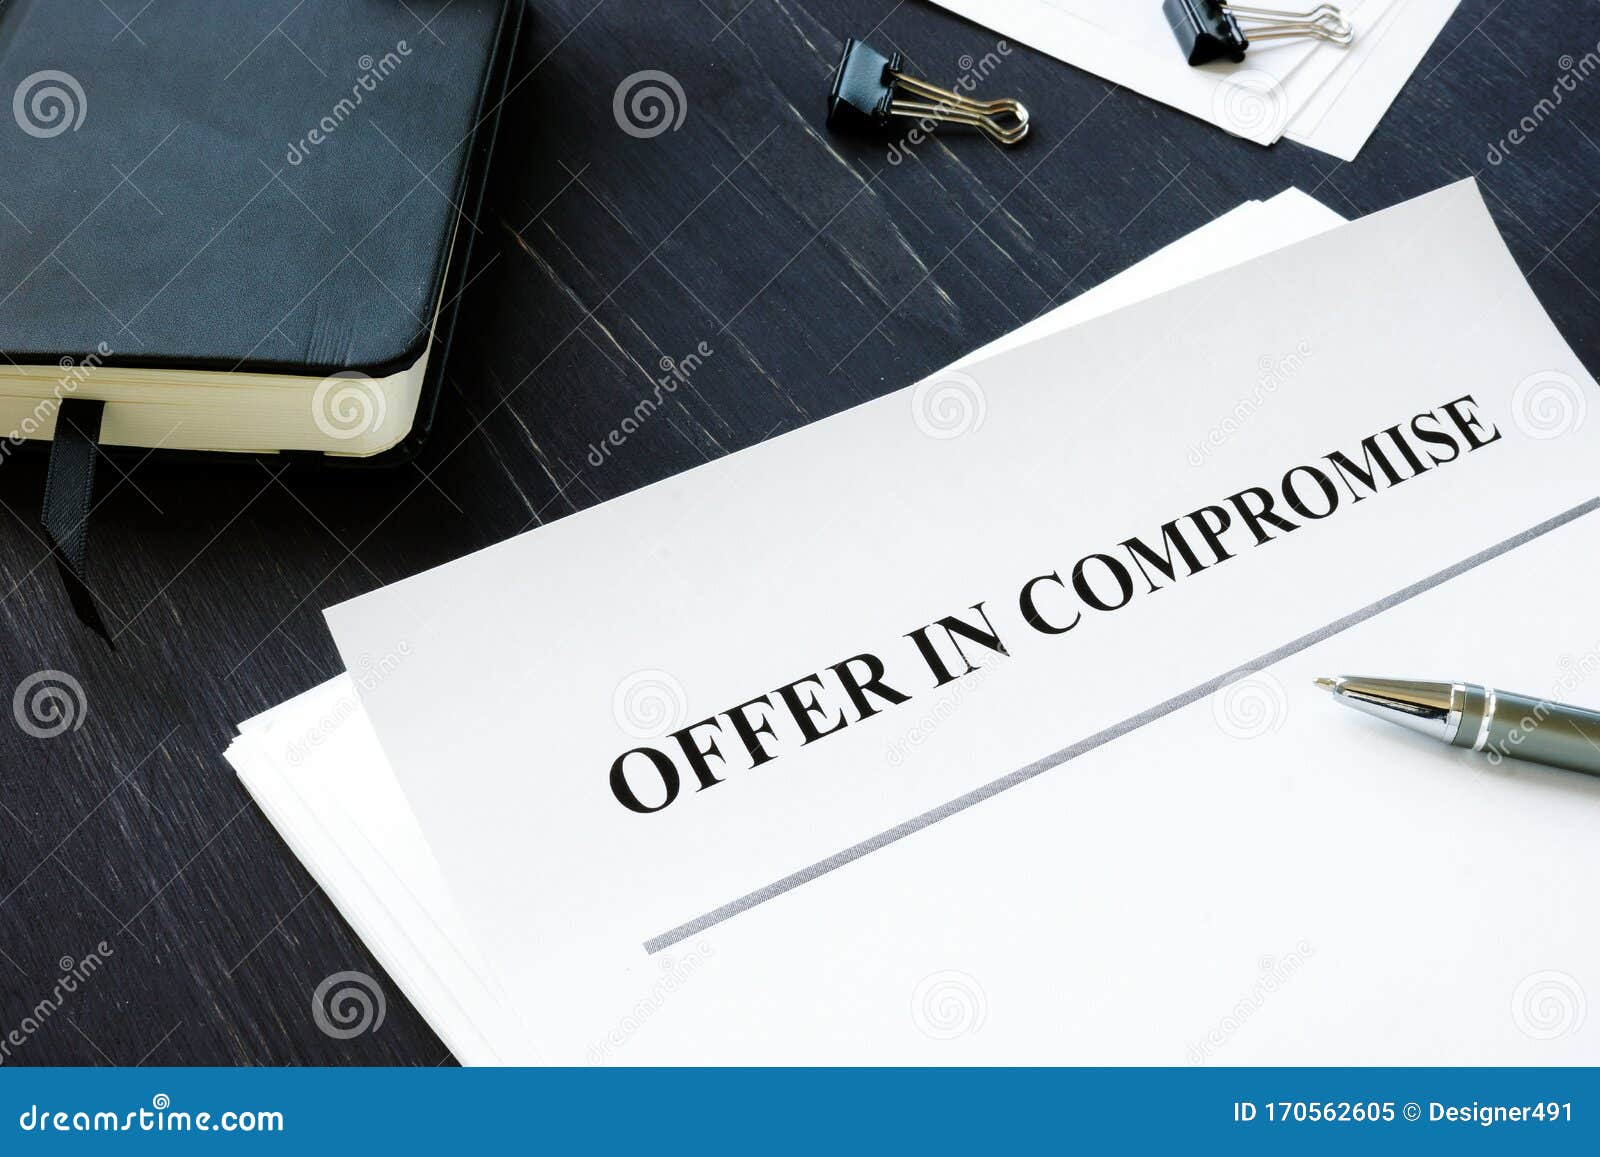 irs offer in compromise oic agreement.